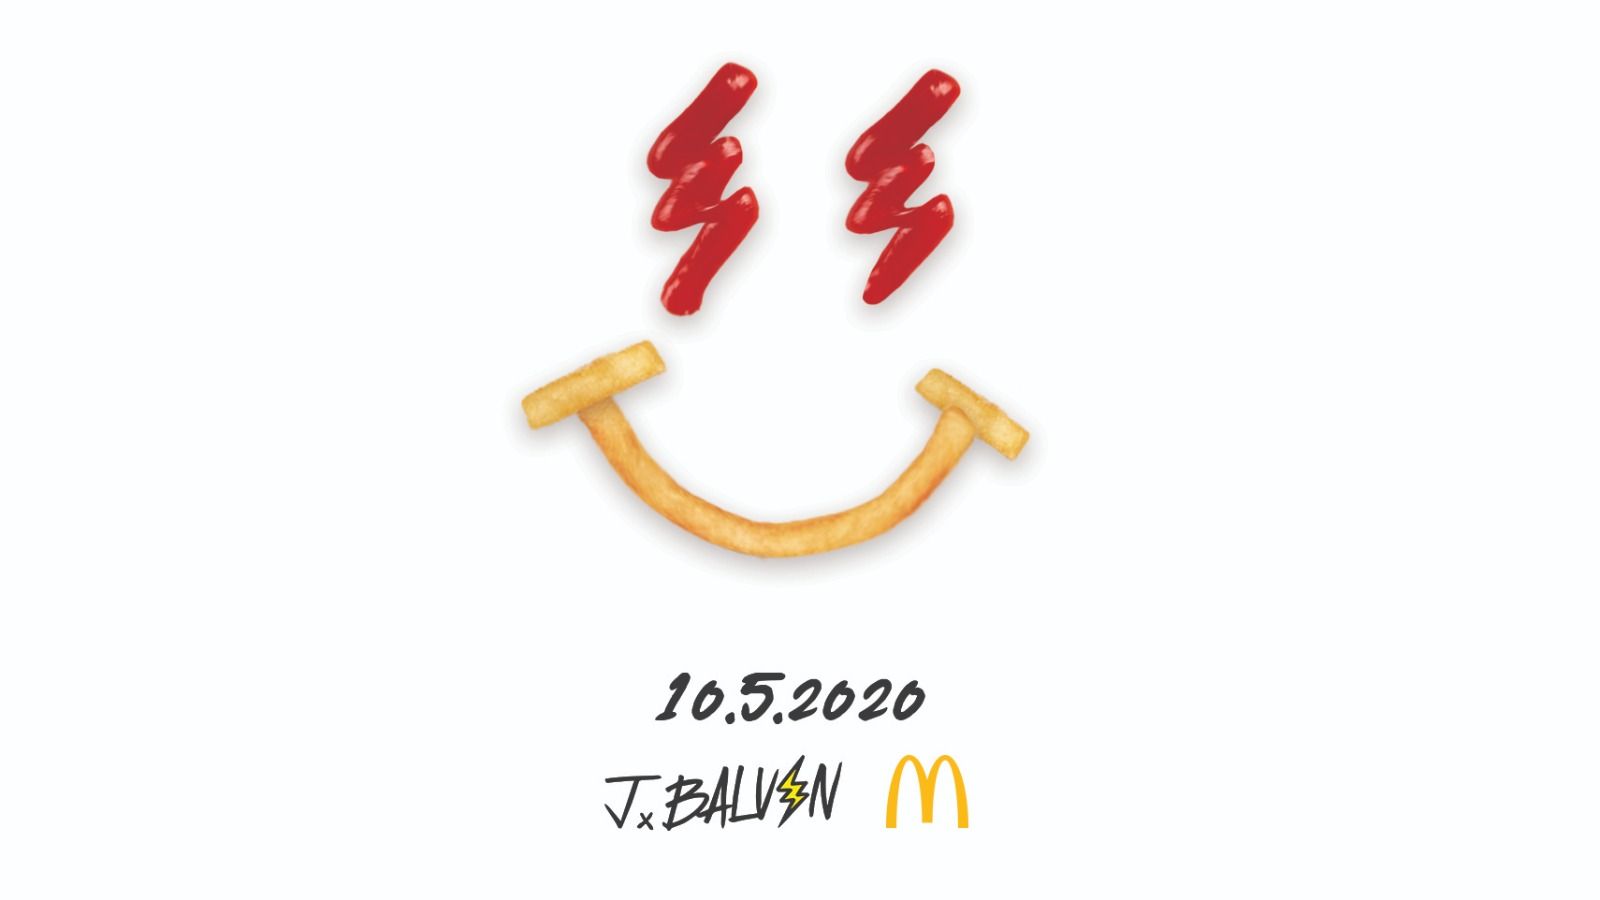 McDonalds announce new collaboration meal with Jose Balvin, after Travis Scott meal